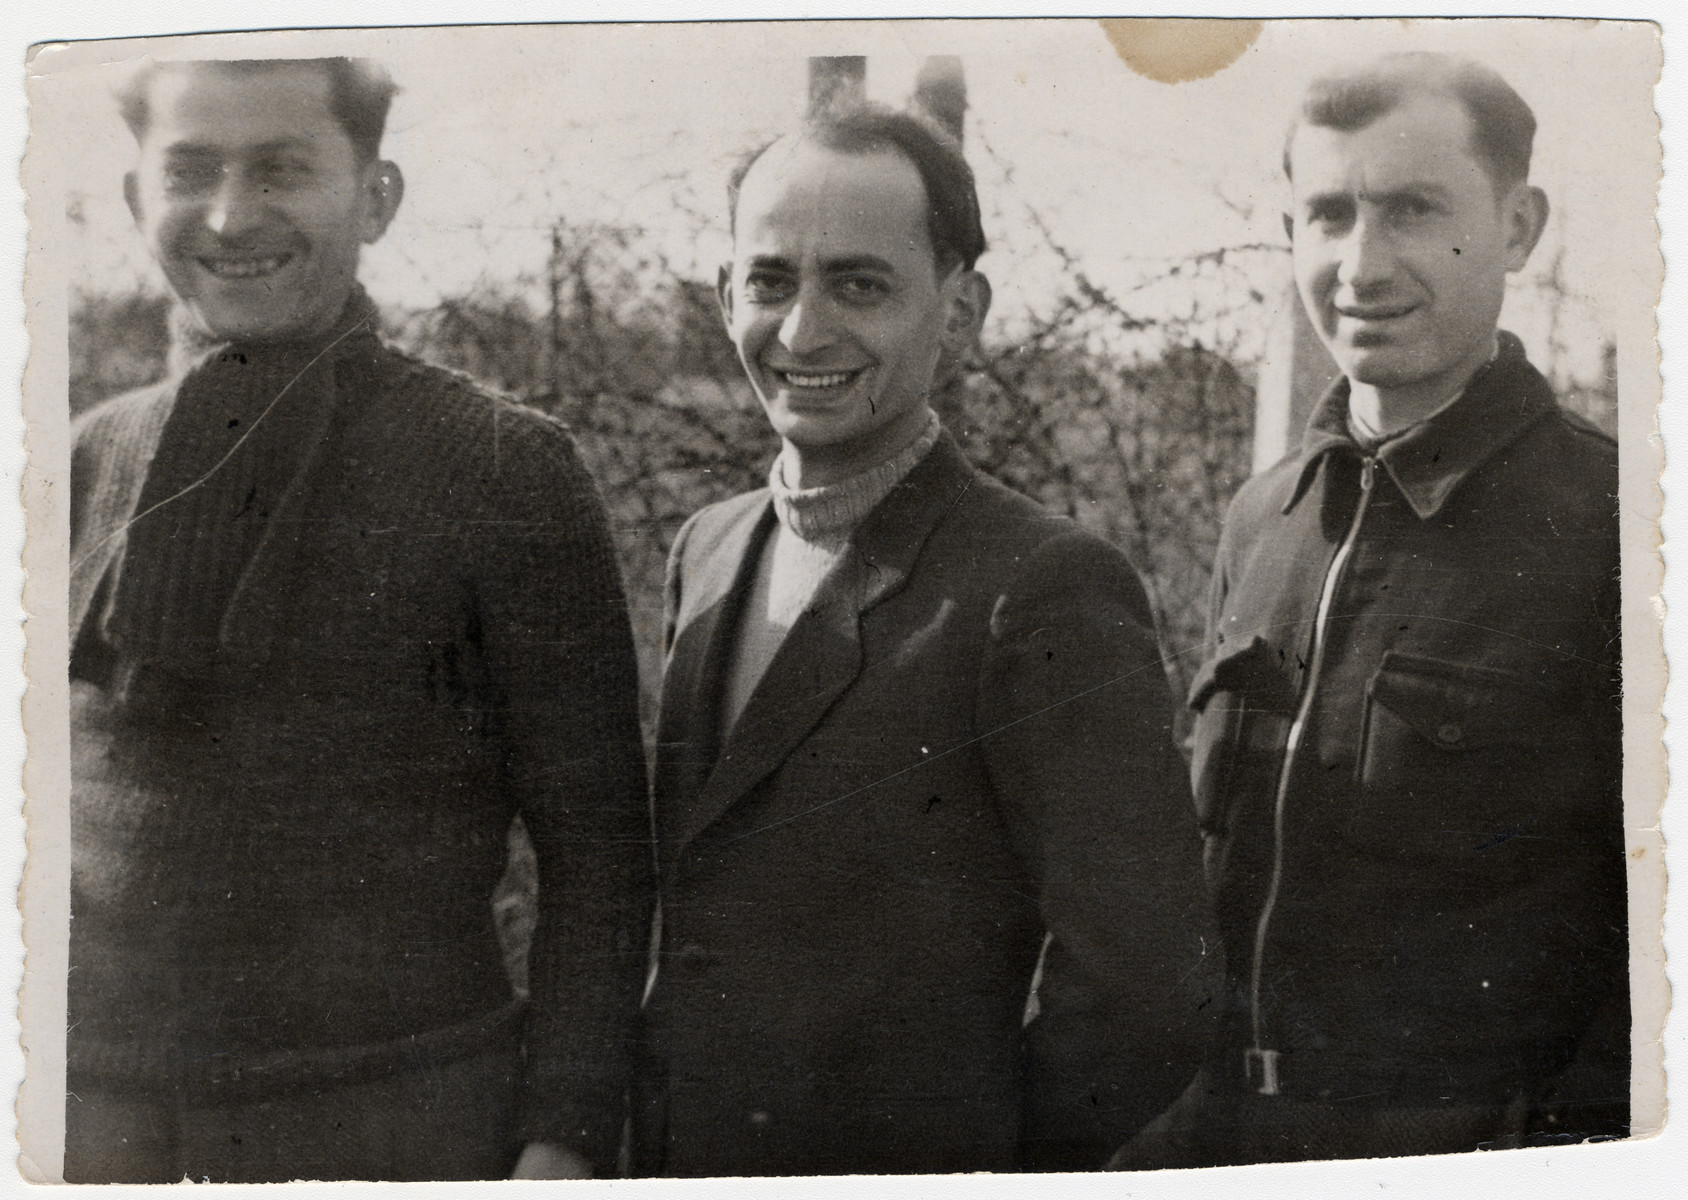 Close-up portrait of three Jewish men in the Beuane-La-Rolande internment camp.

Pictured are Chil Sztal, Jankiel Michalowiciz and Moishe Sztal.

The original caption reads: To my dear brother in law and sister in law and our dear cousins.  We are sending you this photograph as a remembrance of our time in the Camp Beaune-la-Roland.  Passover 1942.